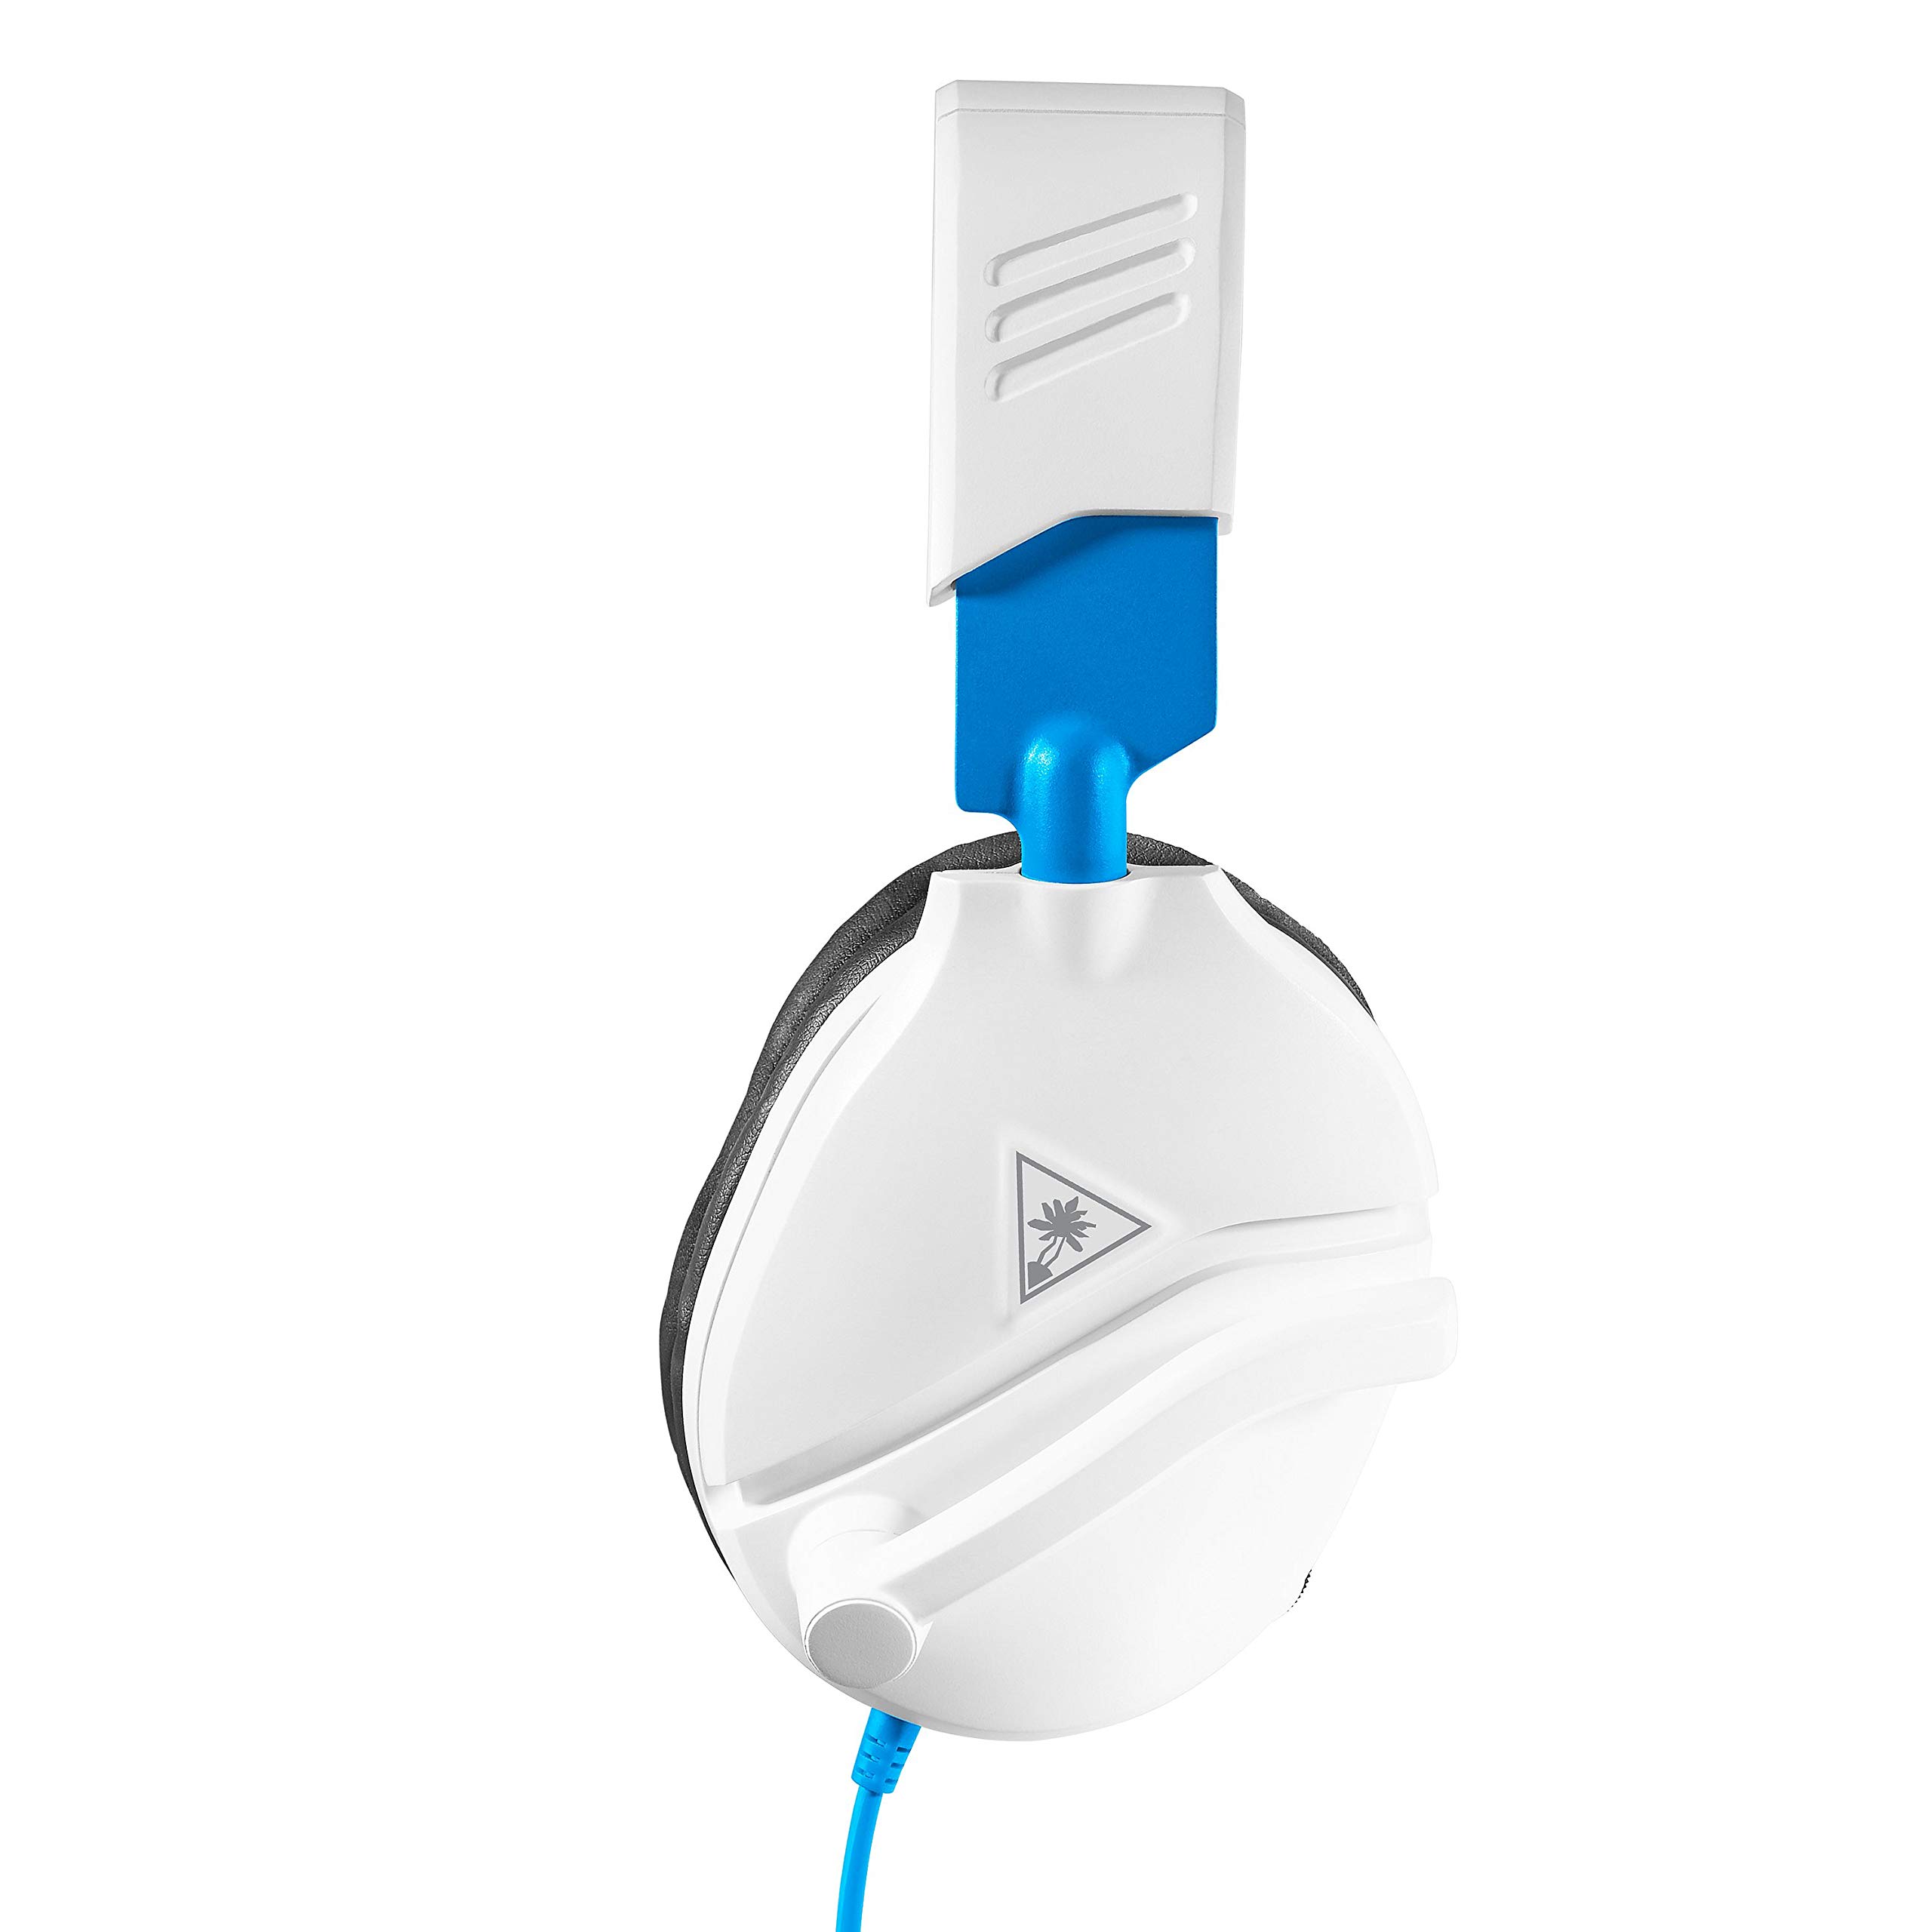 Turtle Beach Recon 70 PlayStation Gaming Headset for PS5, PS4, Xbox Series X/ S, Xbox One, Nintendo Switch, Mobile, & PC with 3.5mm - Flip-to-Mute Mic, 40mm Speakers, 3D Audio – White